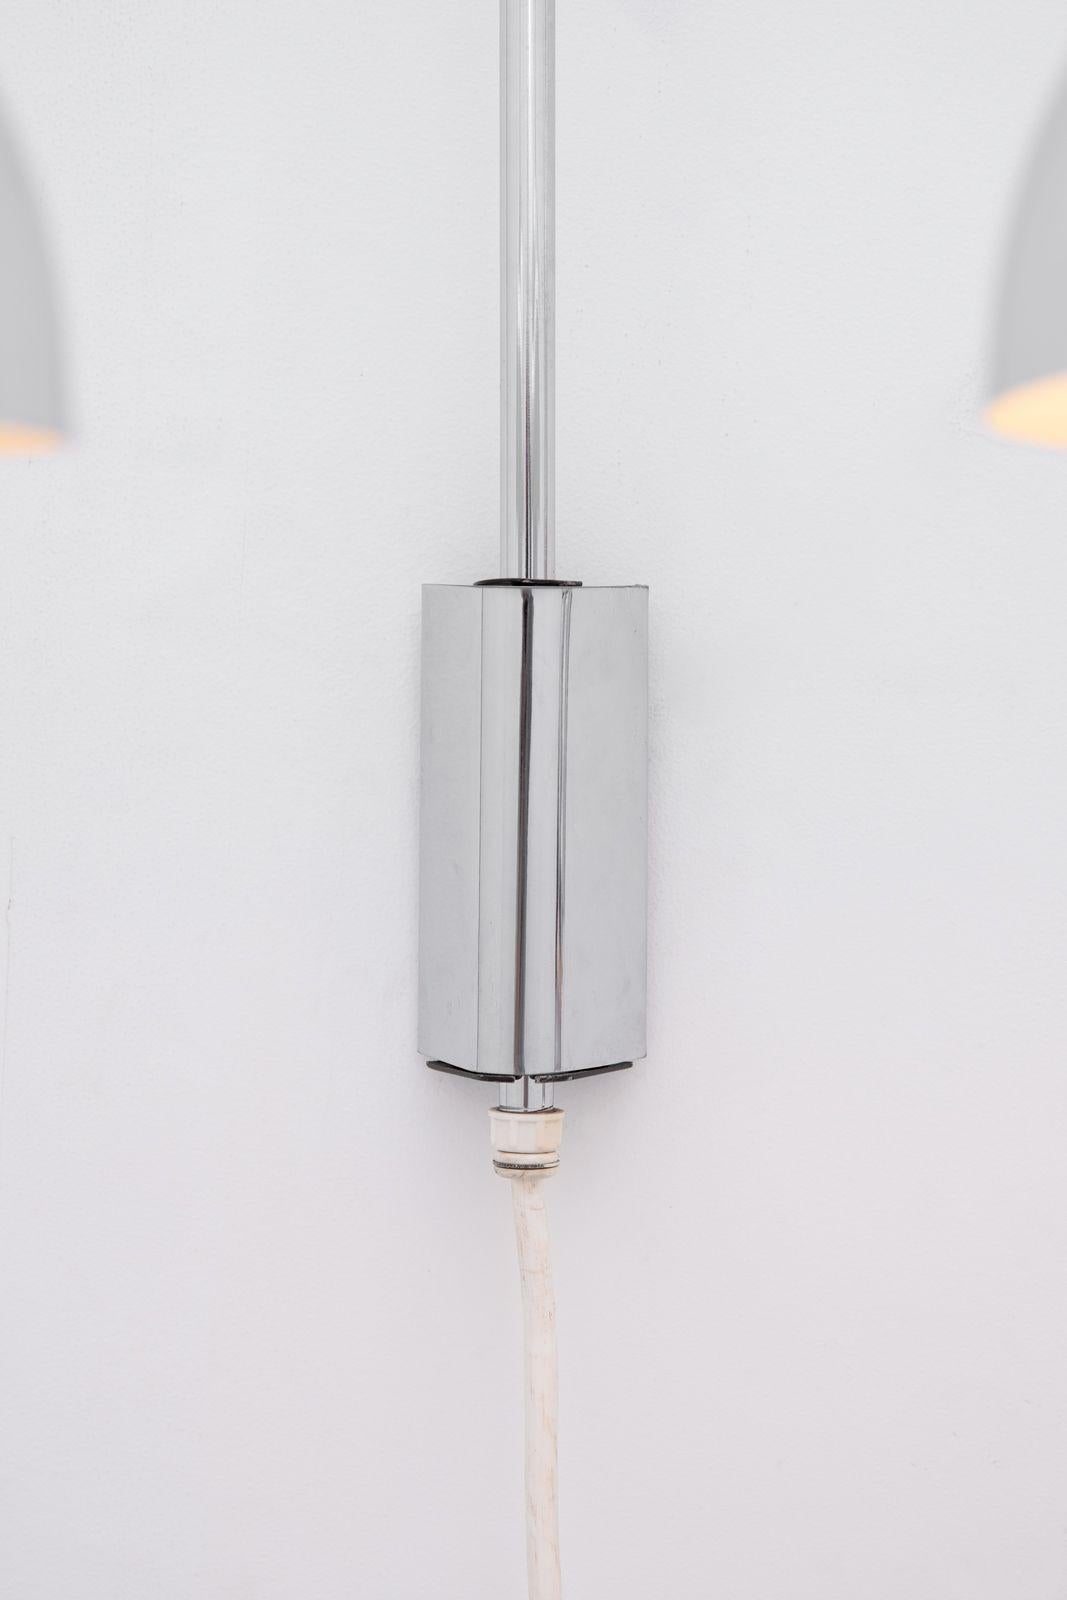 Danish Verner Panton Sconces in Chrome from the Flower Pot Series Wall Mount 1960s For Sale